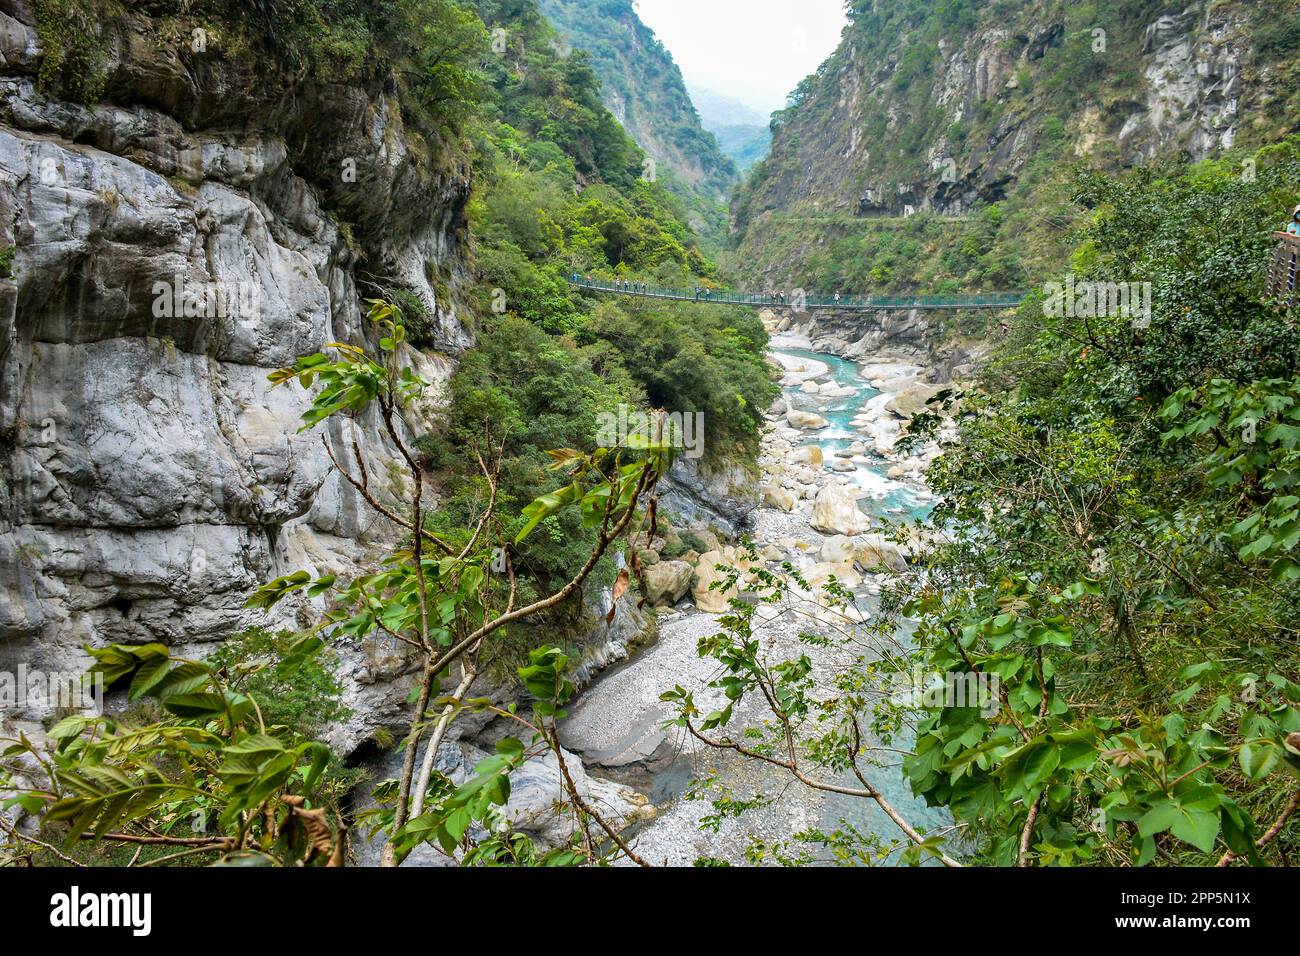 Tourists crossing bridge over narrow turquoise Liwu River Gorge surrounded by green mountain valley of Taroko Gorge in Taroko National Park, Taiwan Stock Photo